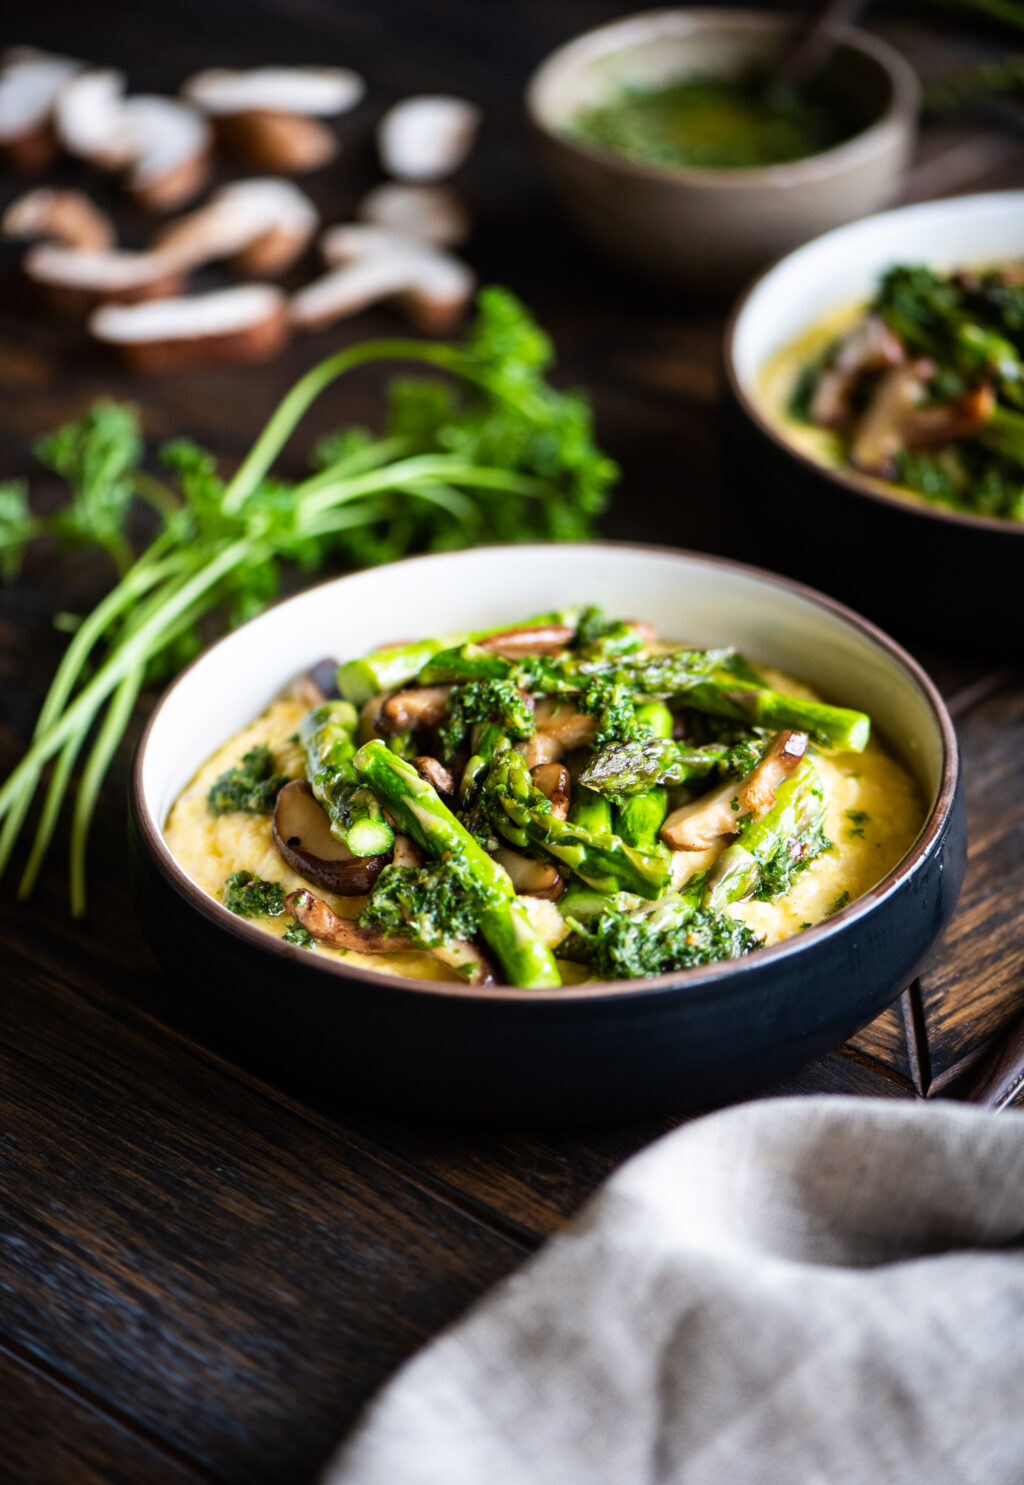 cheesy polenta and spring veggies surrounded by fresh mushrooms, asparagus, and parsley